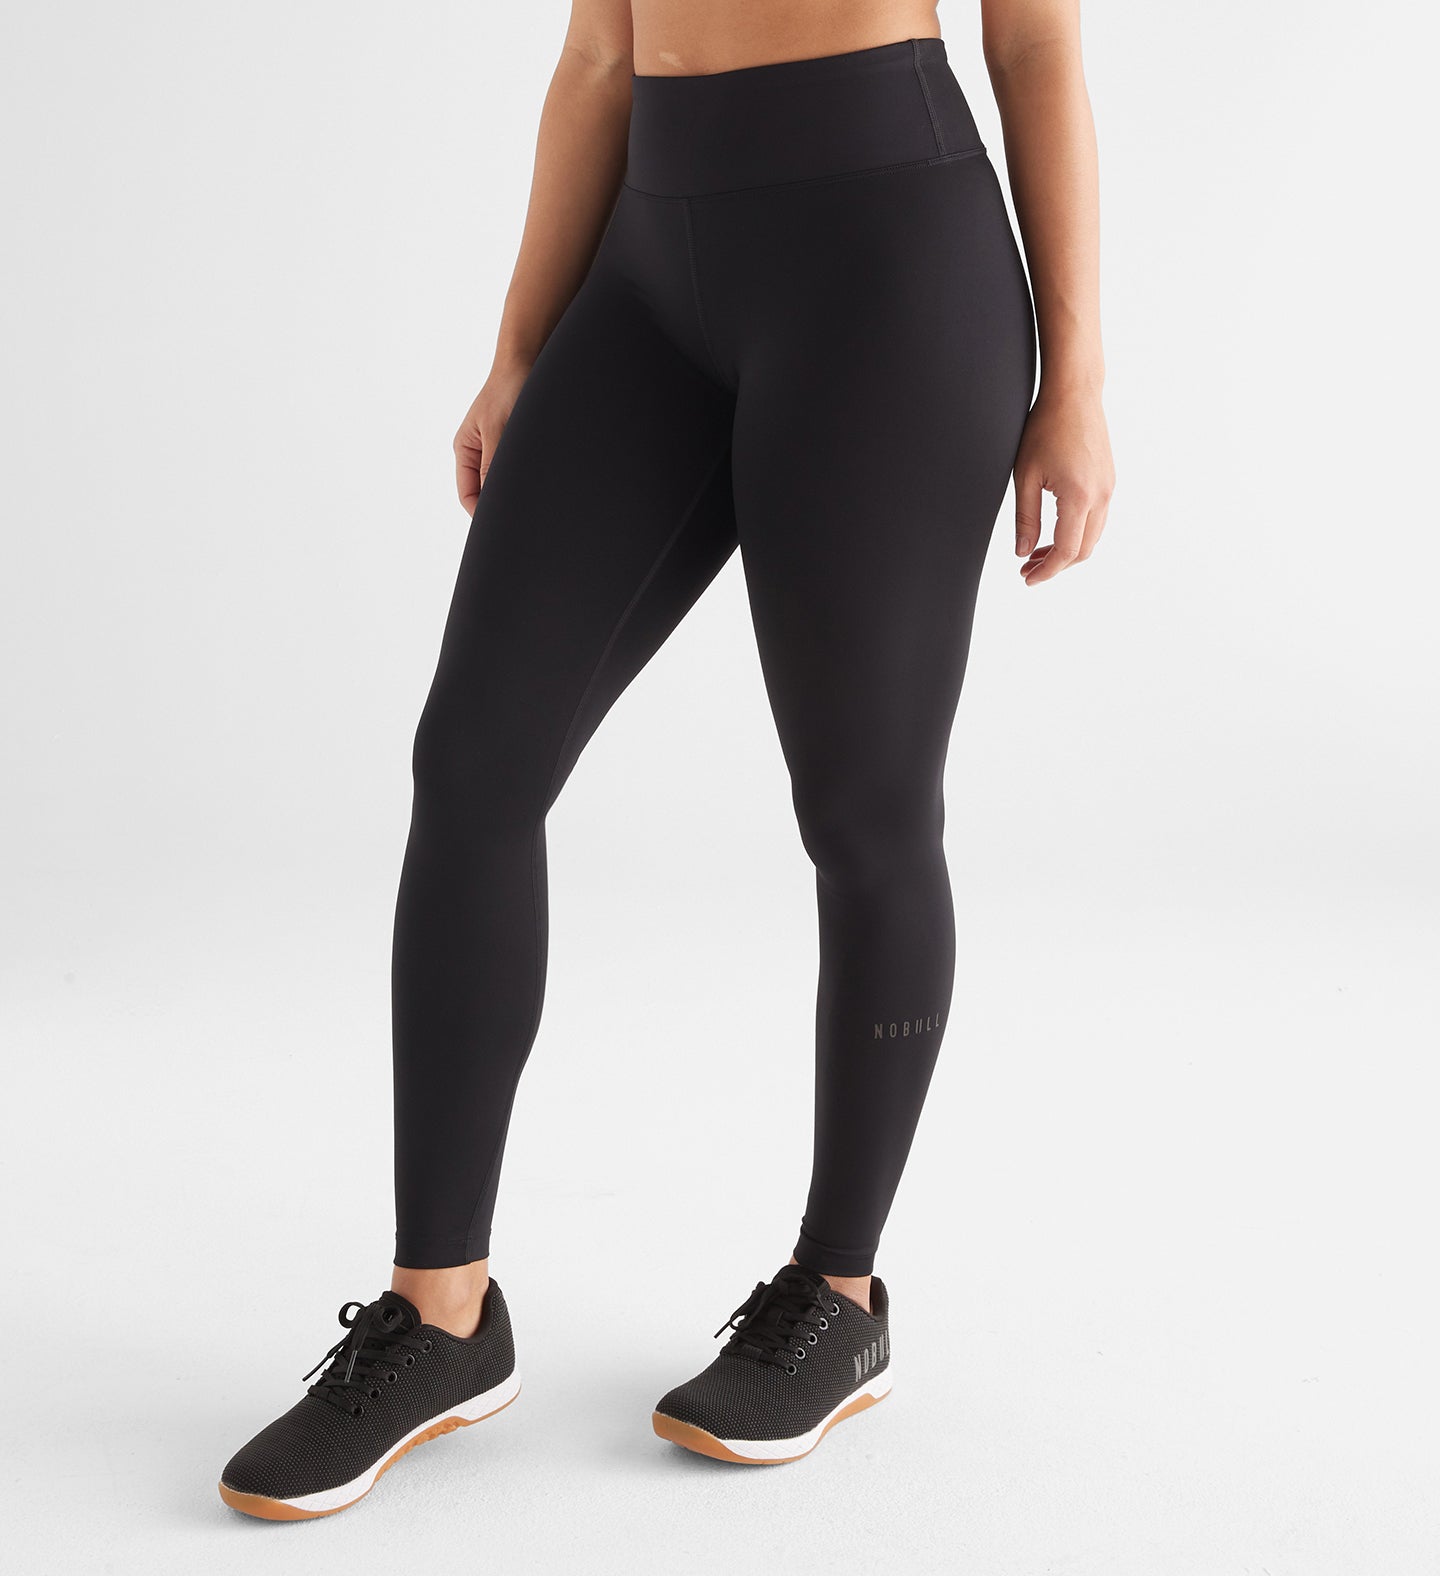 Lululemon athletica Fast and Free Tight 28